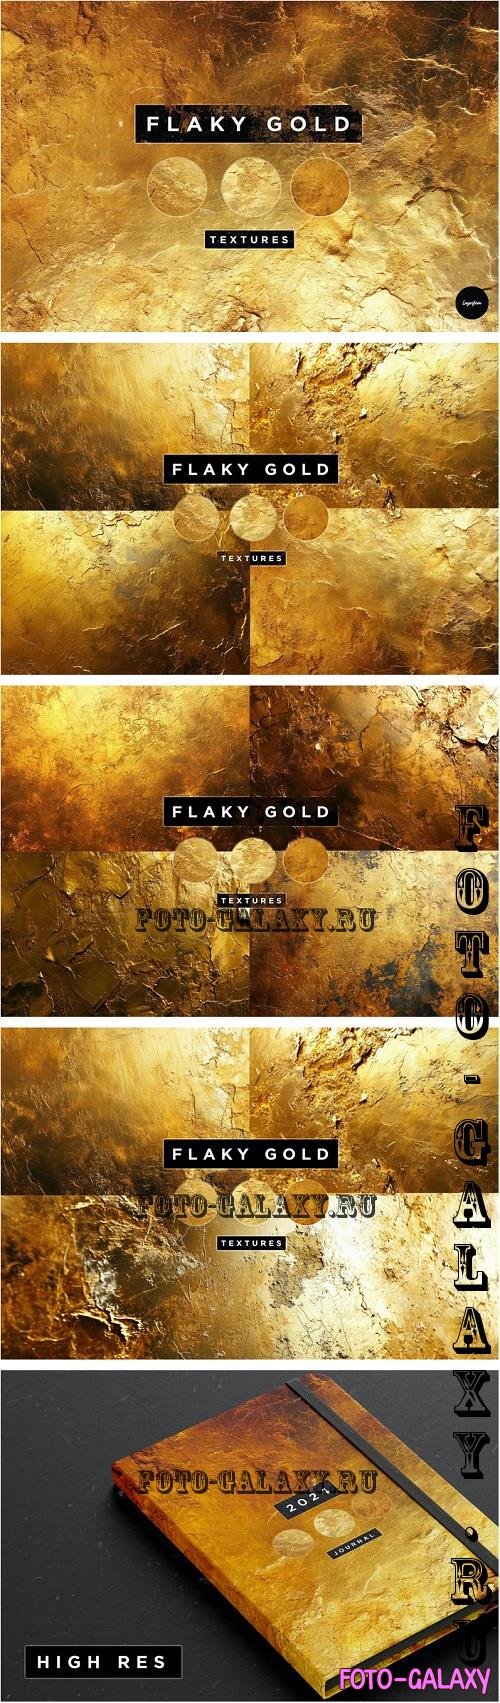 Flaky Gold Textures Pack - 91945114